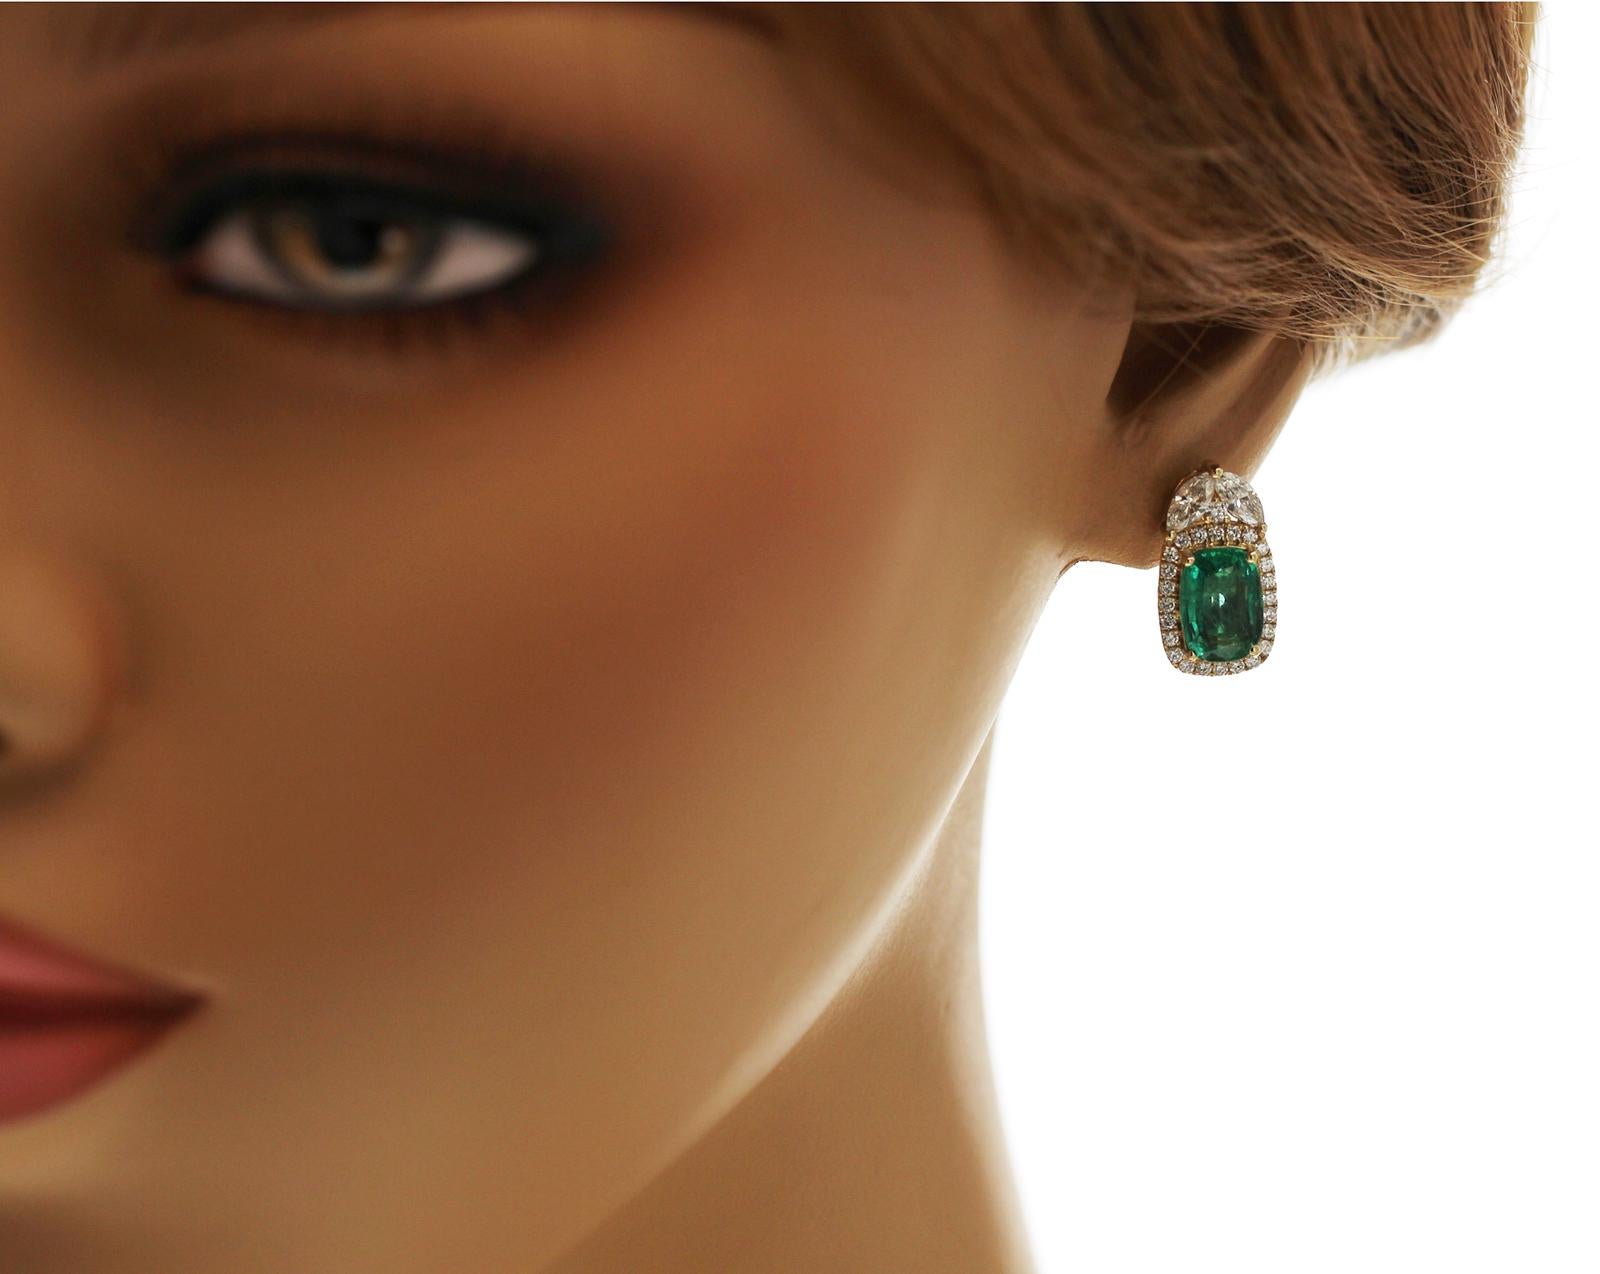 100% Authentic, 100% Customer Satisfaction

Height: 18.5 mm

Width: 10 mm

Metal:14K Yellow Gold

Hallmarks: 14K

Total Weight: 4.30 Grams

Stone Type: 4.18 CT Natural Emerald & G SI2 1.44 CT Diamonds

Condition: New

Estimated Price: $12700

Stock